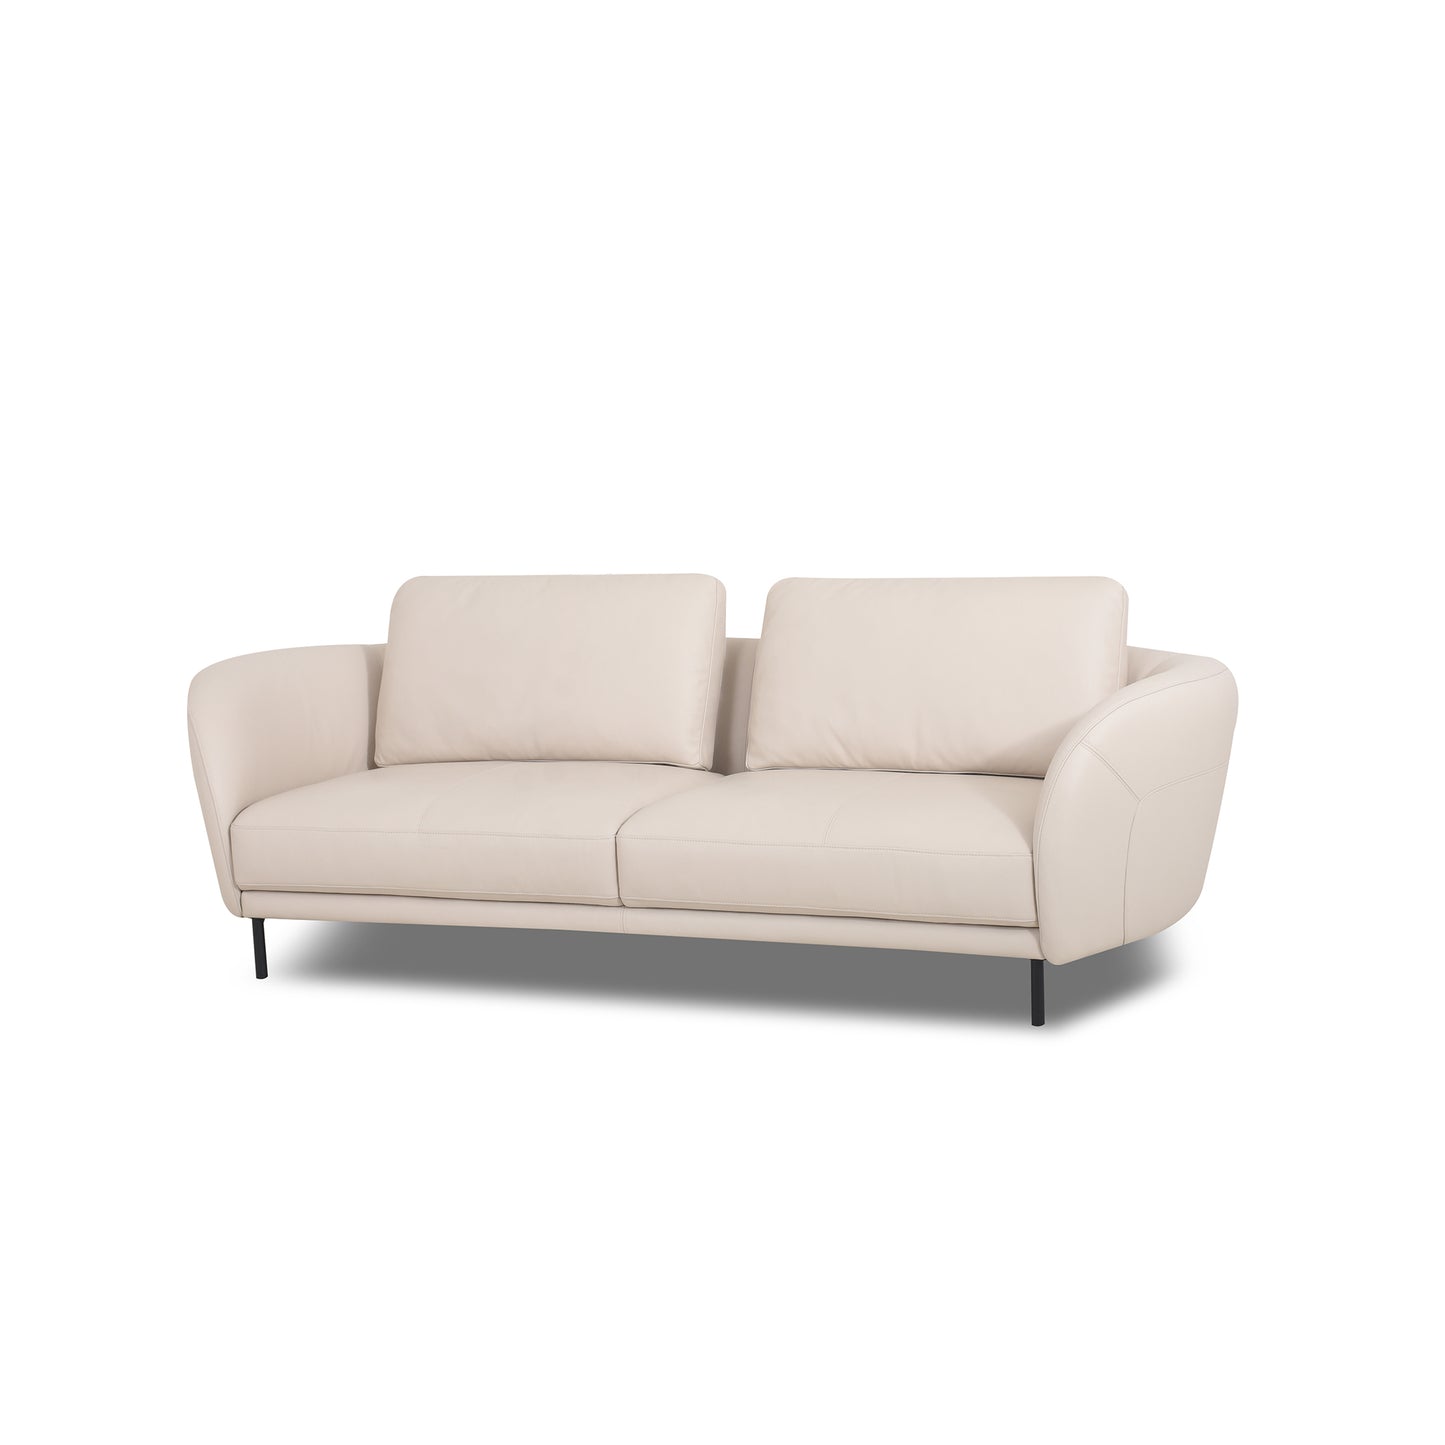 Style & Save - Carre 2.5S Sofa in Leather or Fabric